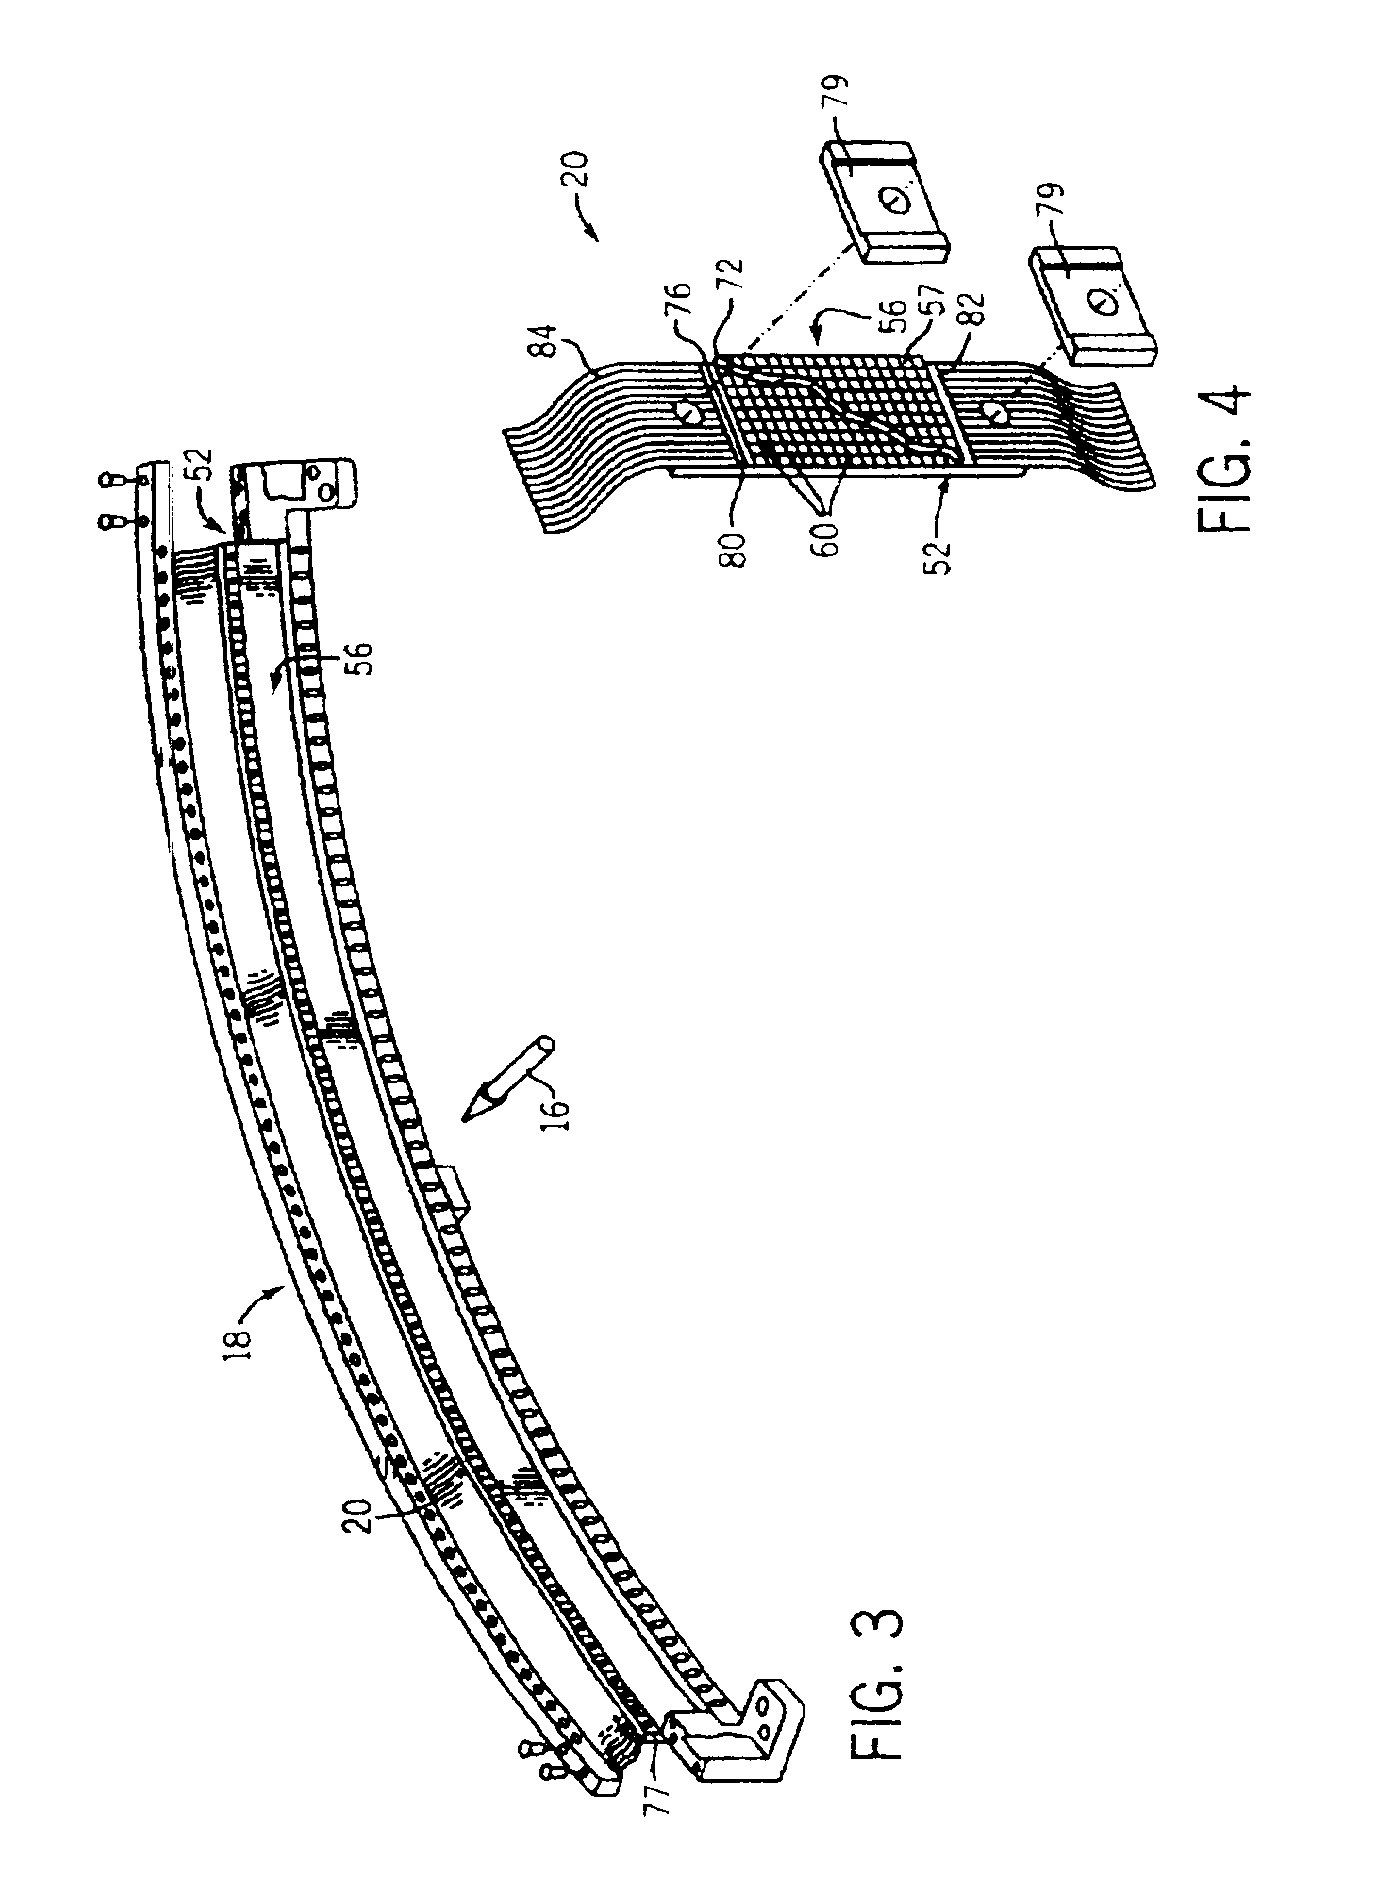 CT detector having a segmented optical coupler and method of manufacturing same